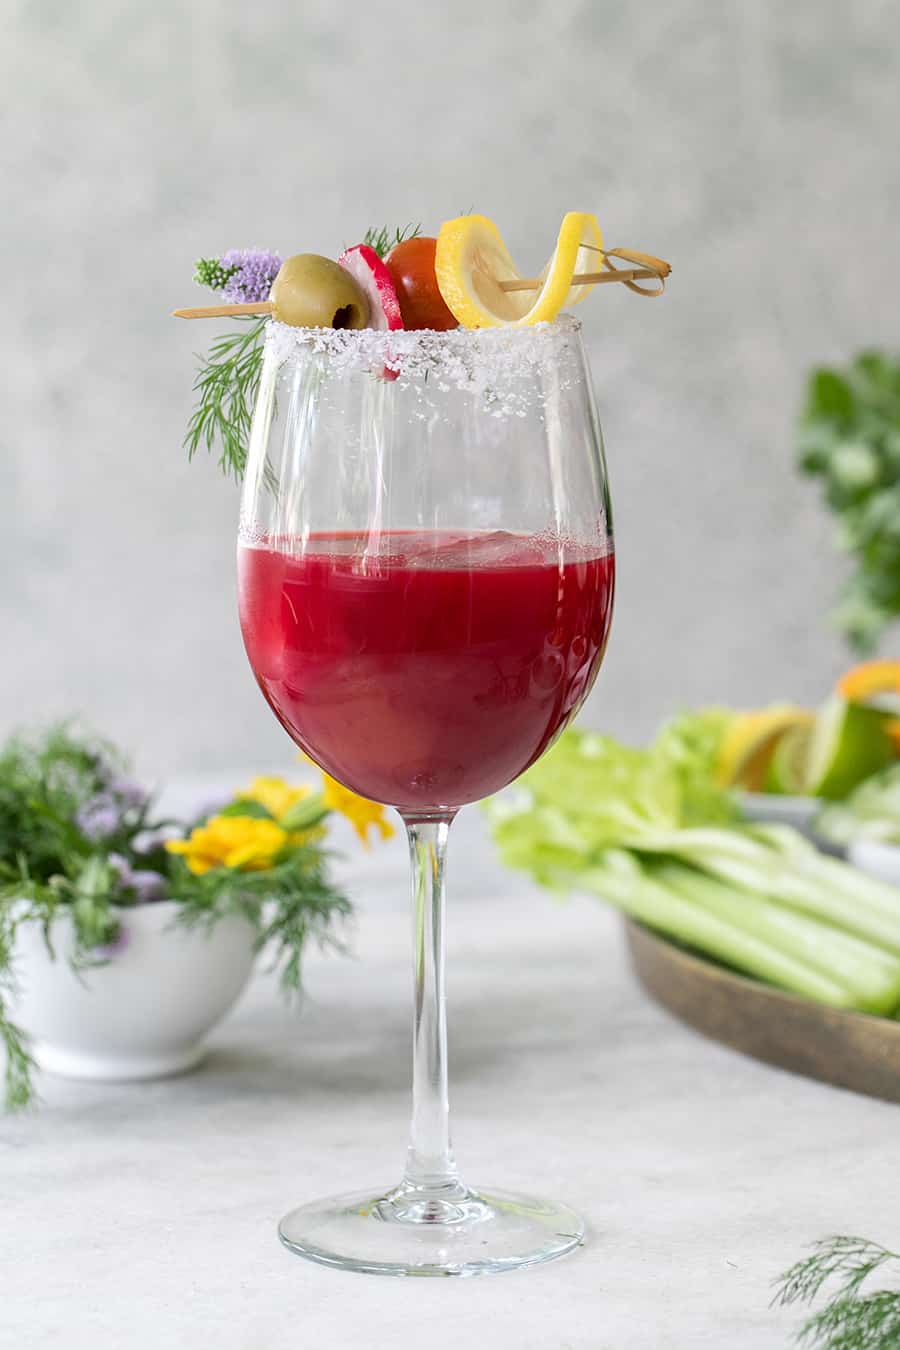 Beet juice bloody mary in a wine glass